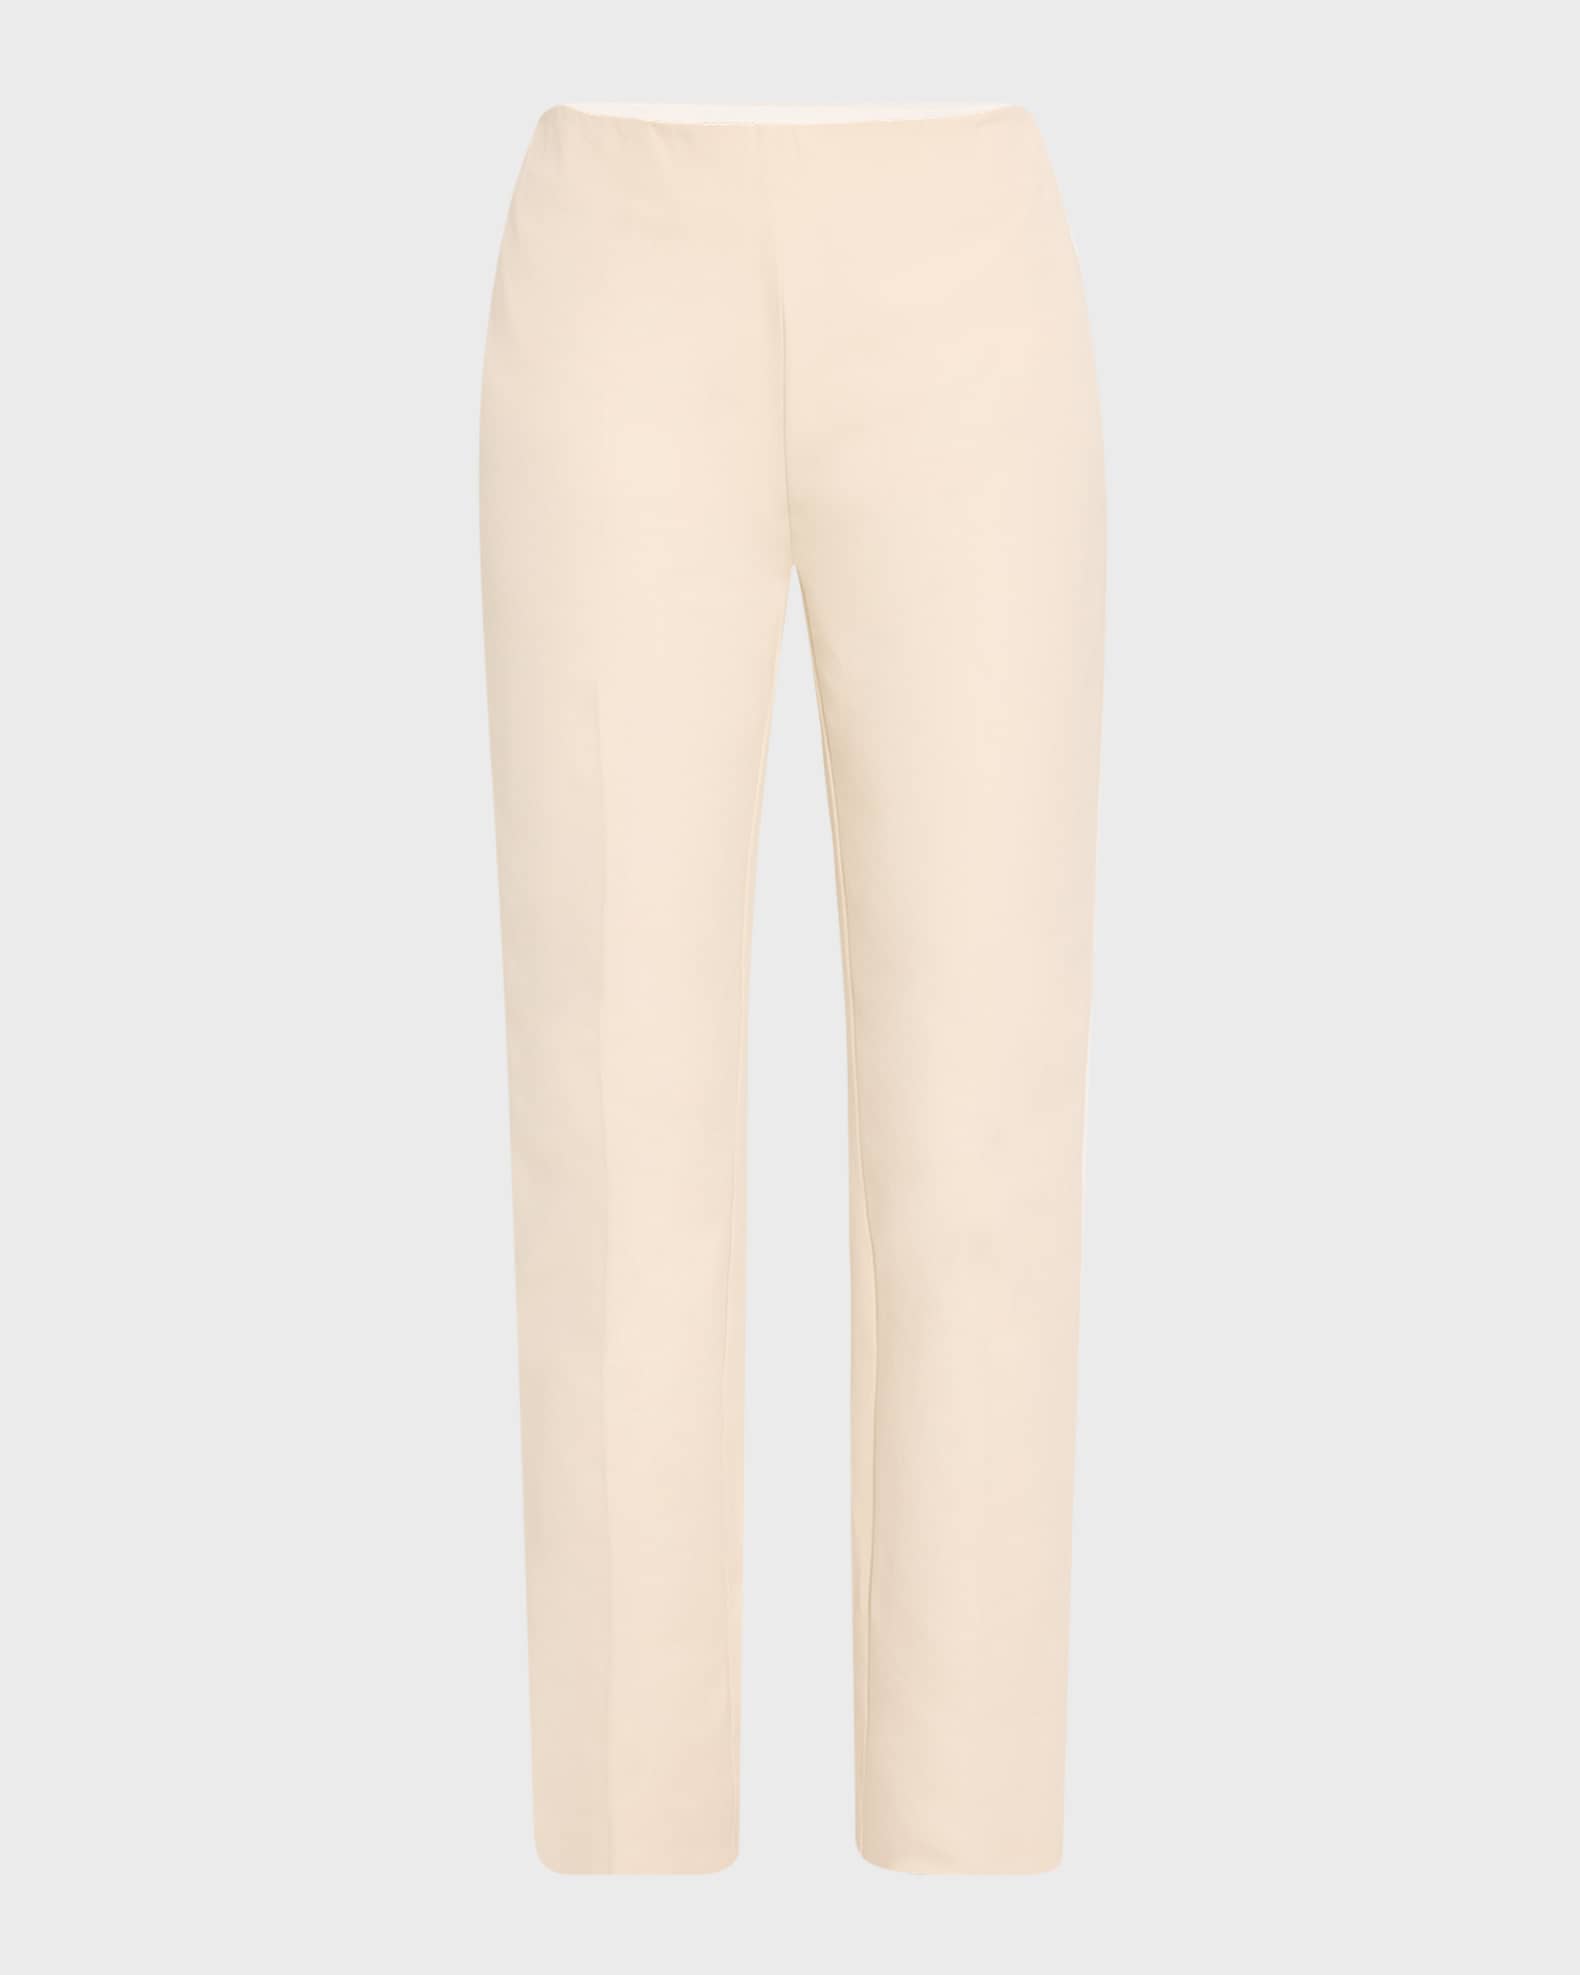 Lafayette 148 New York Stanton Tapered Stretch Cotton Ankle Pants ...